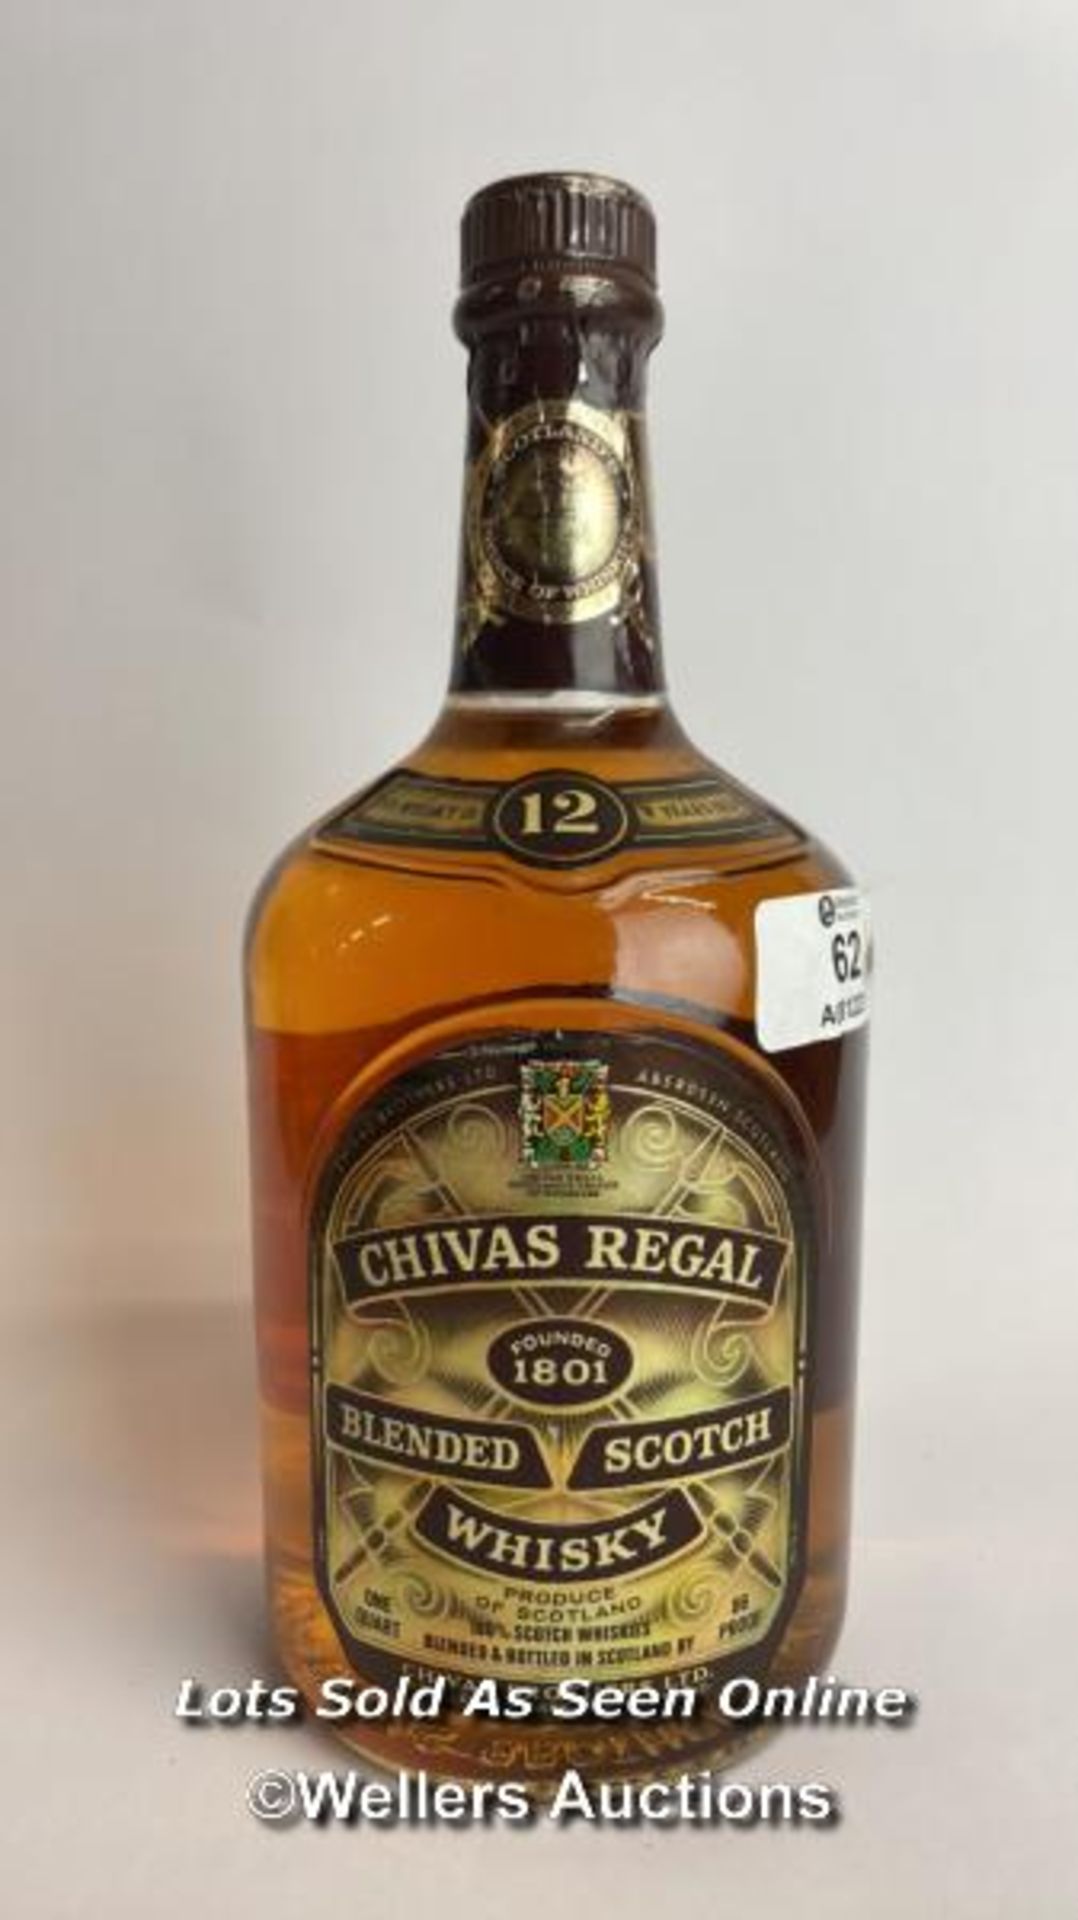 Chivas Regal Blended Scotch Whisky, Aged 12 years, 1L, 86 Proof / Please see images for fill level